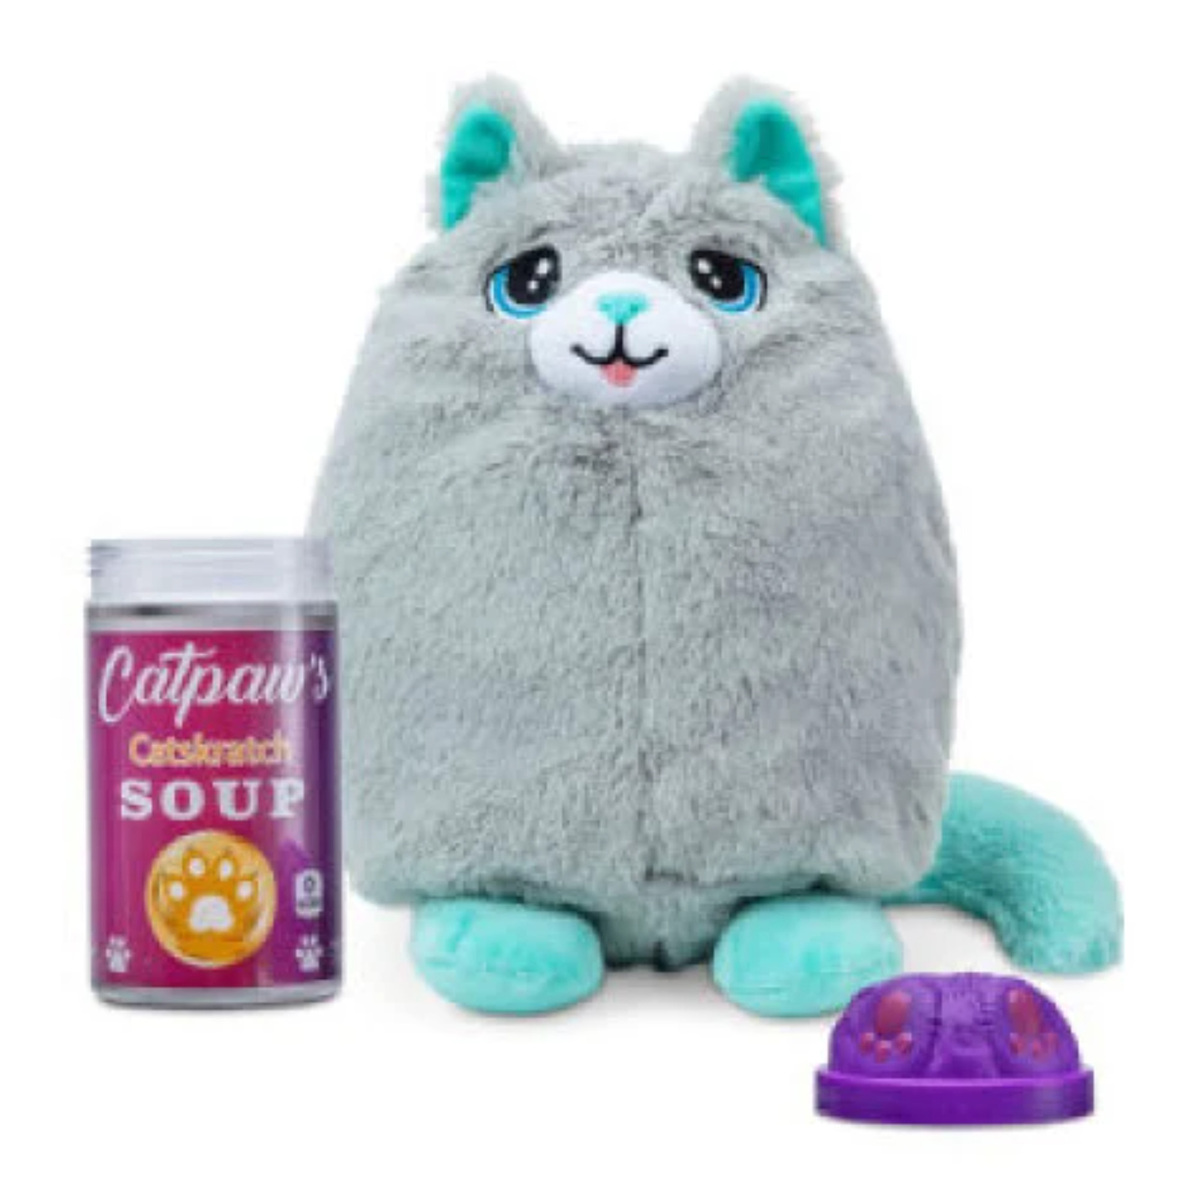 Basic Fun Misfittens Puffy Cat Collectible Plush Toys 03935/36 Assorted